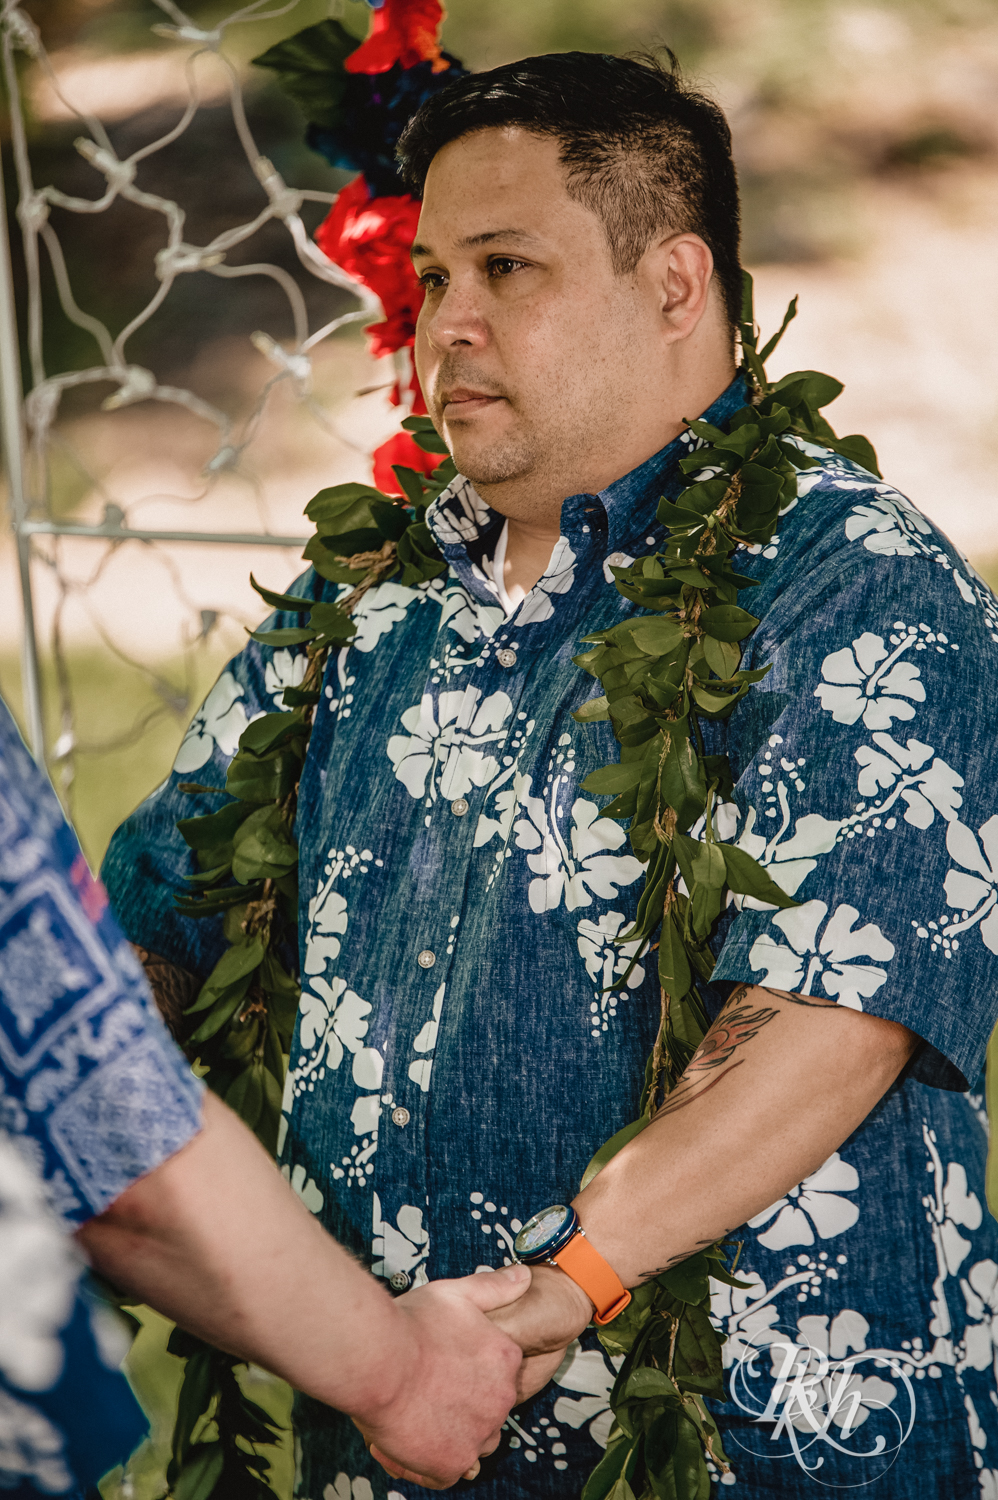 Two grooms hold hands during backyard elopement ceremony while wearing Hawaiian shirts and leis.